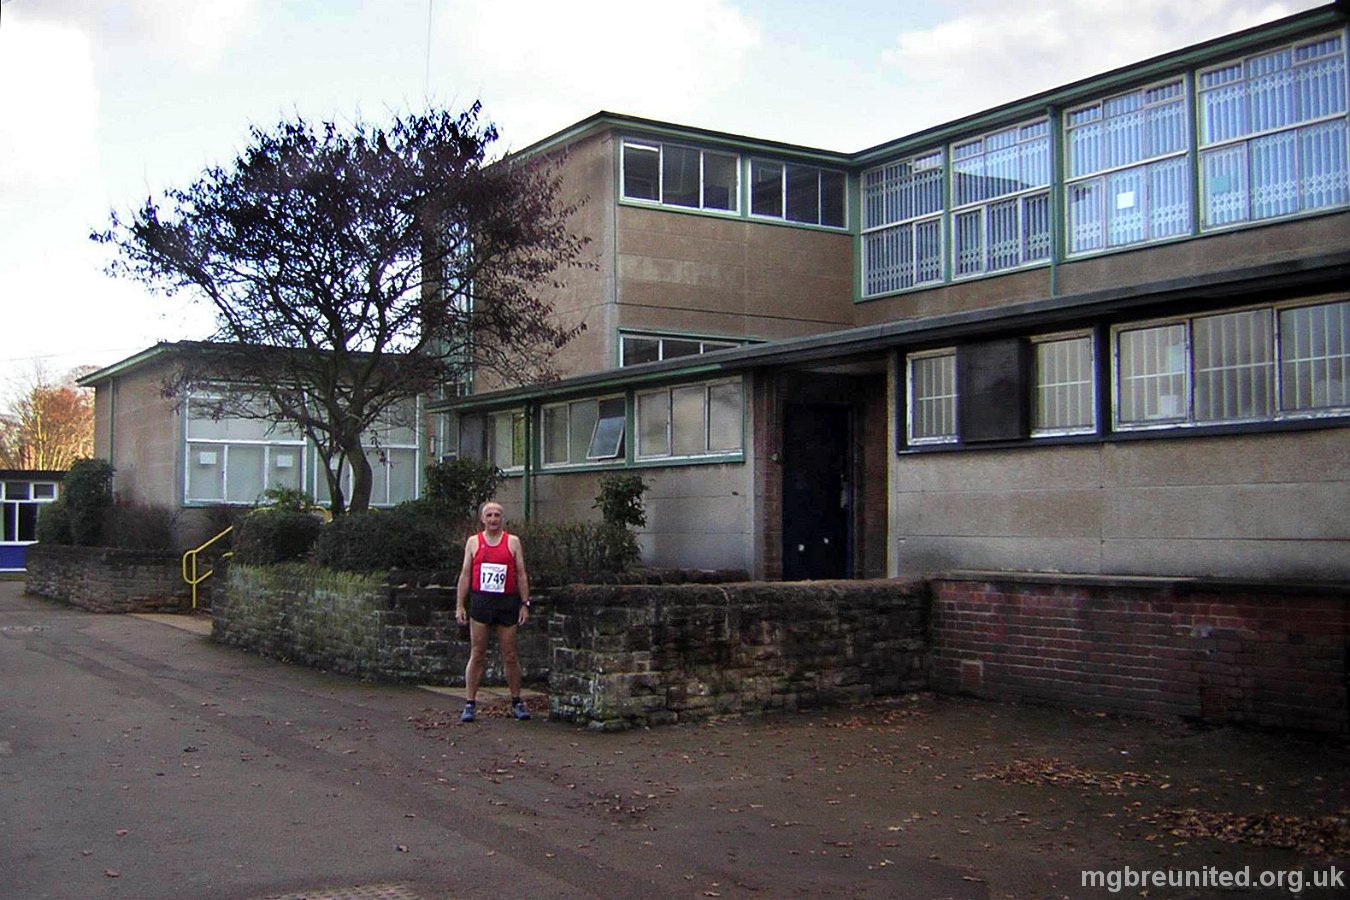 2012 01 Margaret Glen-Bott Buildings Music Room (Miss Watts) left then upper floor - I think the Art Room with Mr Green. Andy Osgathorpe posing before cross country run outside the boy's toilets and cloak rooms.